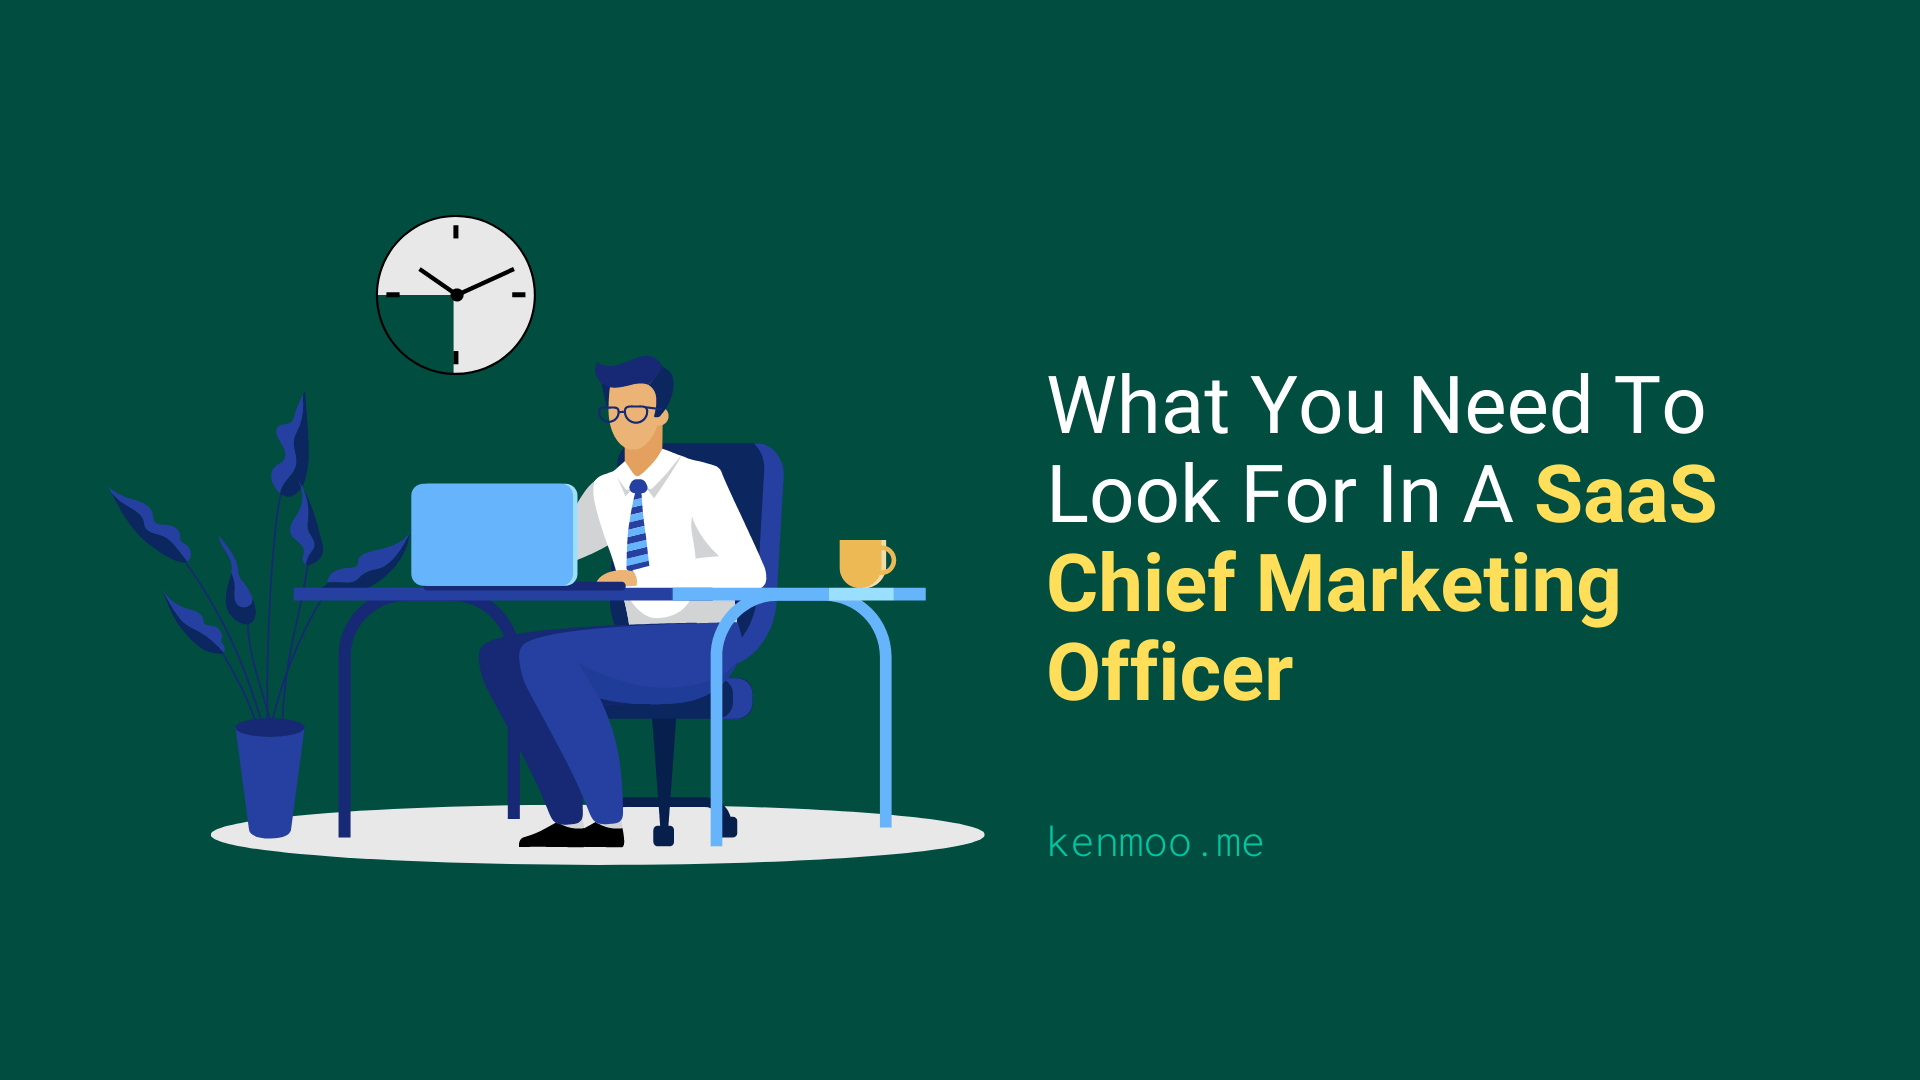 What You Need To Look For In A SaaS Chief Marketing Officer